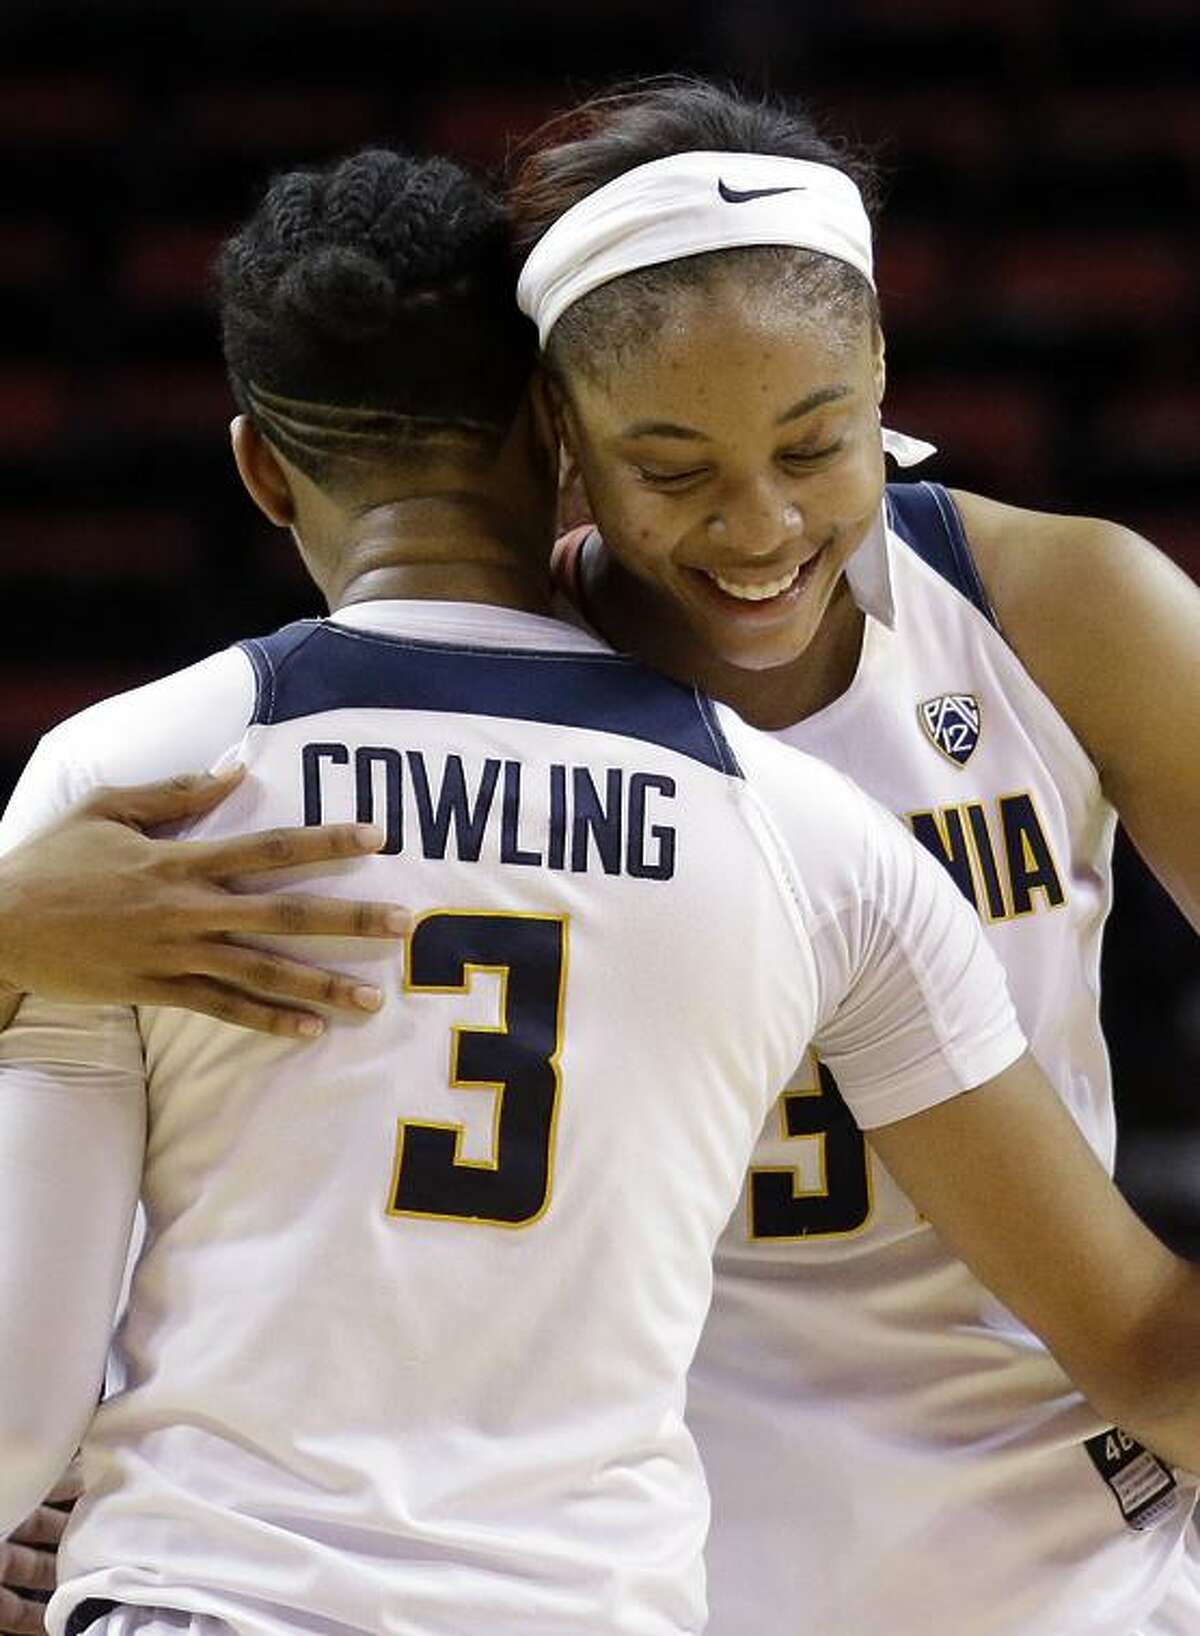 Mikayla Cowling, here embracing Kristine Anigwe, is among Cal’s best players on both sides of the court.